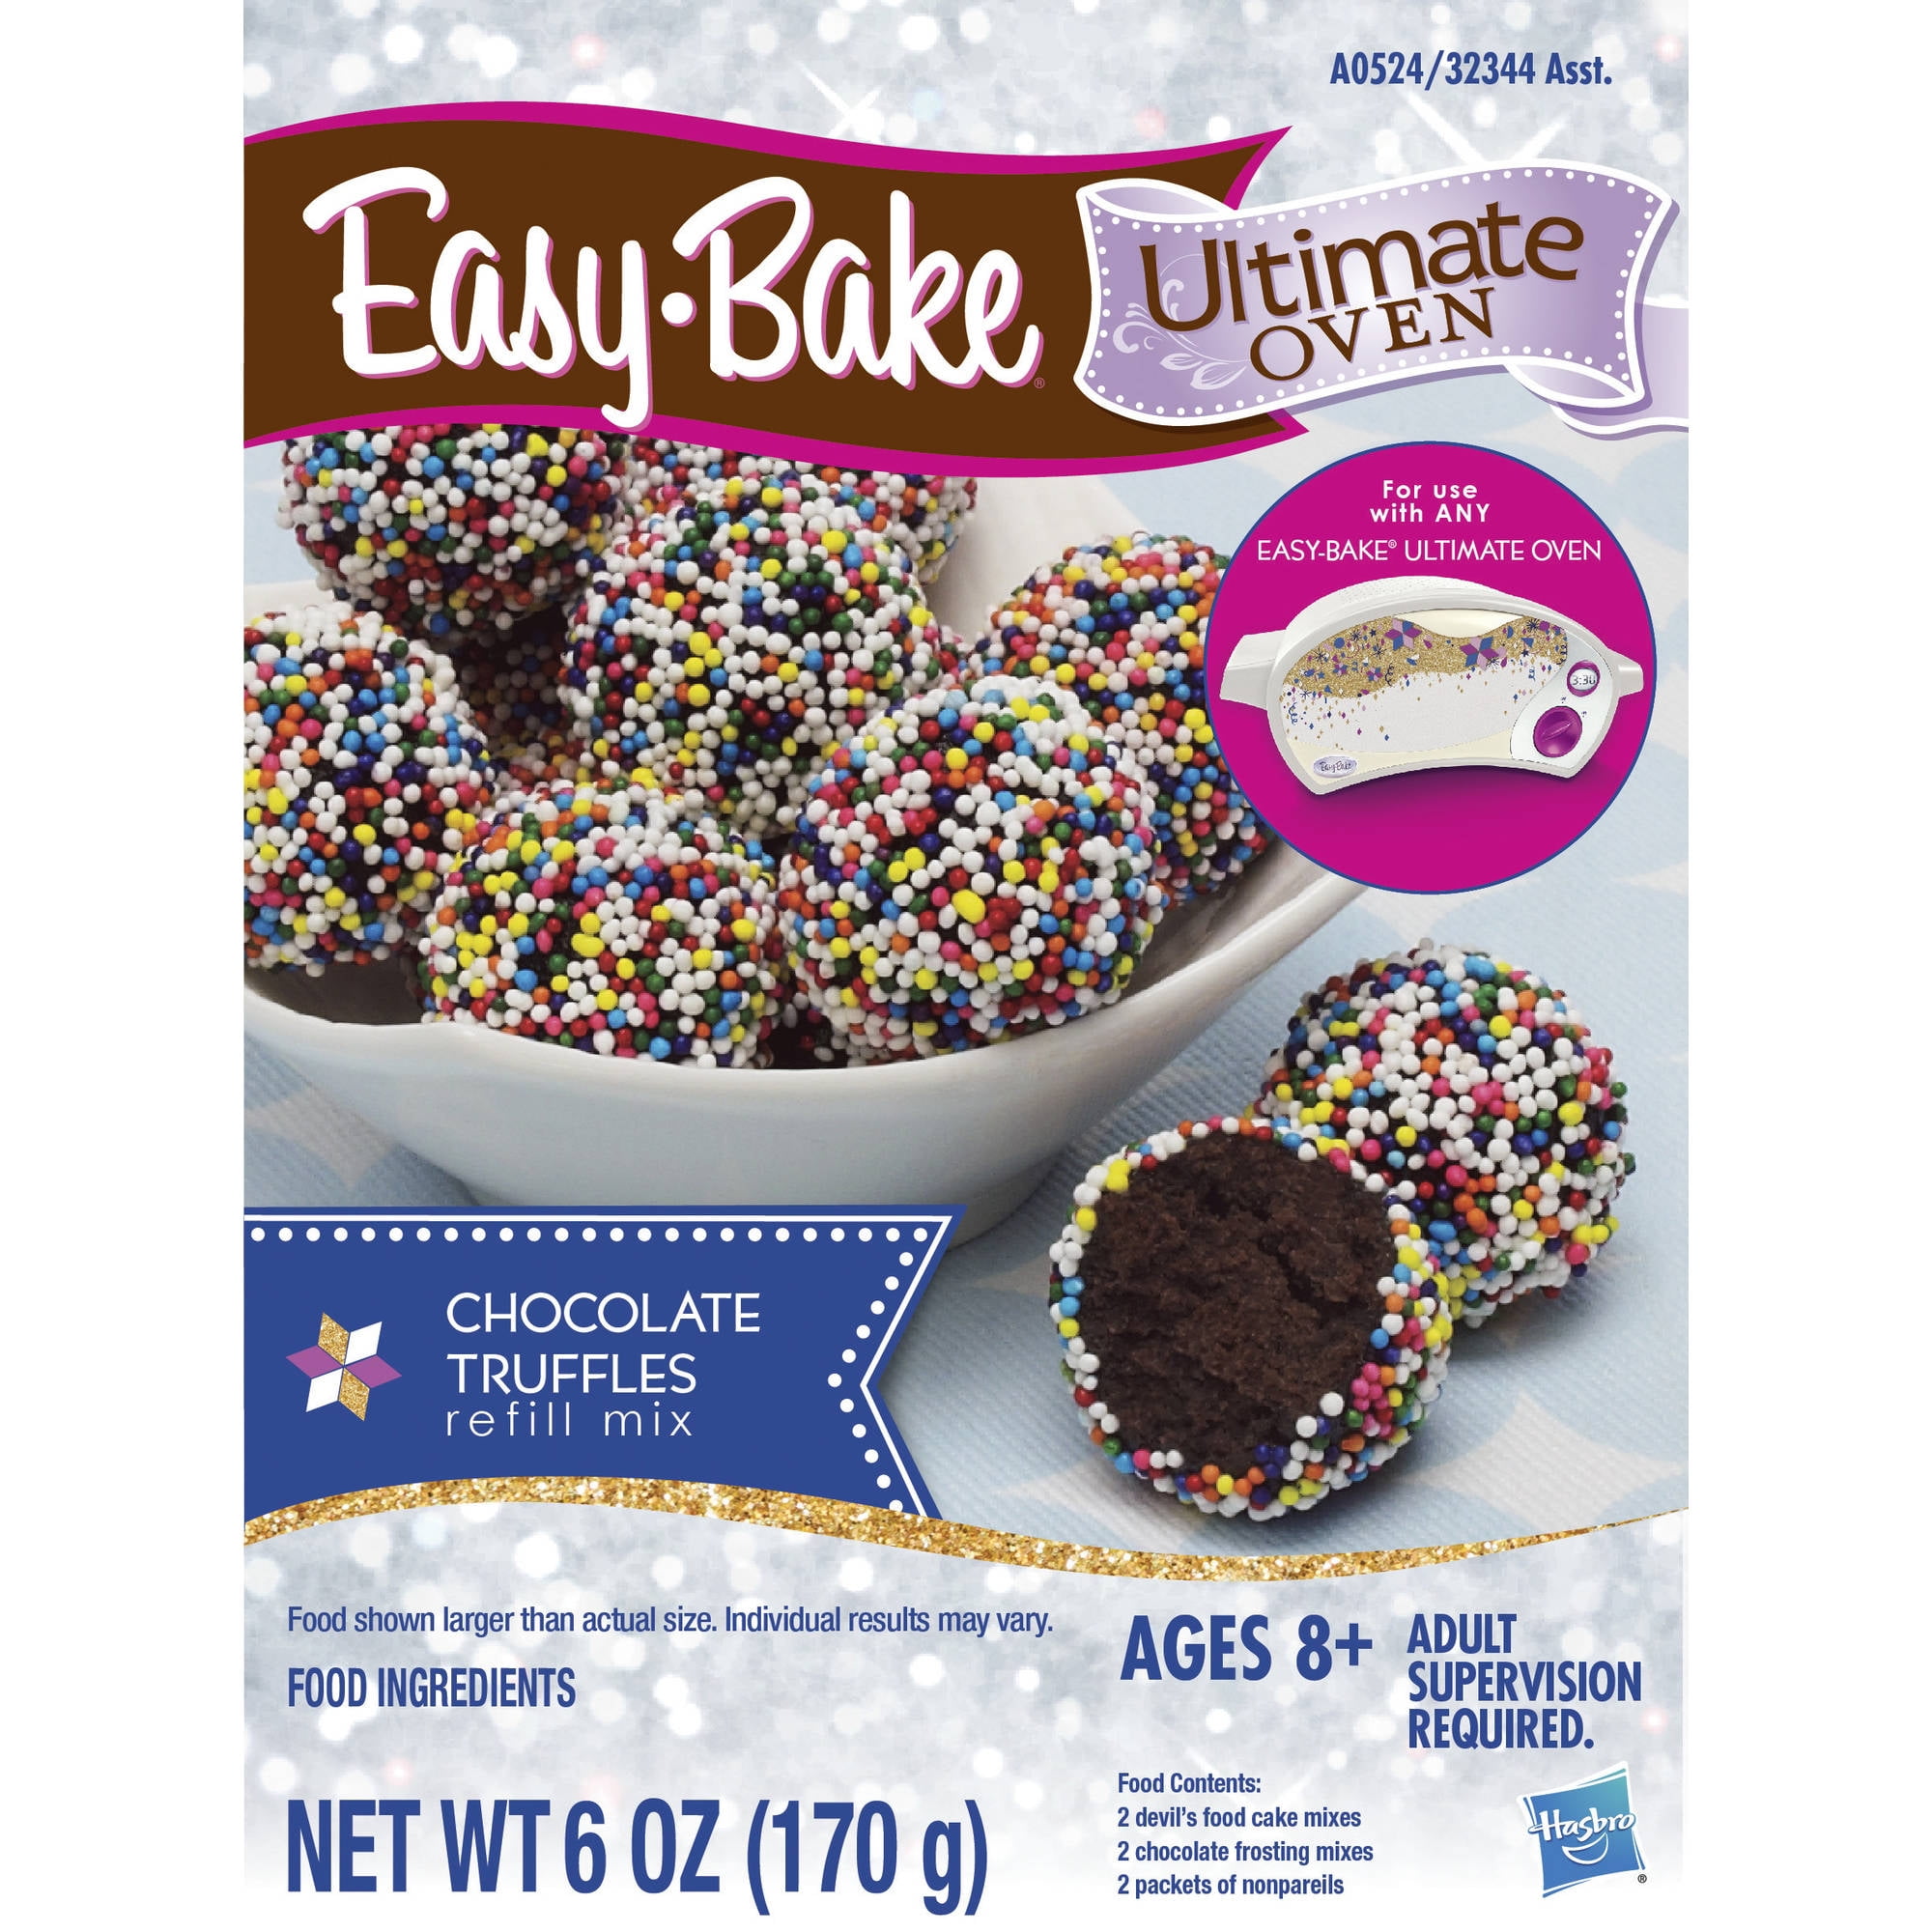 EASY BAKE ULTIMATE OVEN CHOCOLATE TRUFFLES REFILL MIX PACK NEW IN PACKAGE 